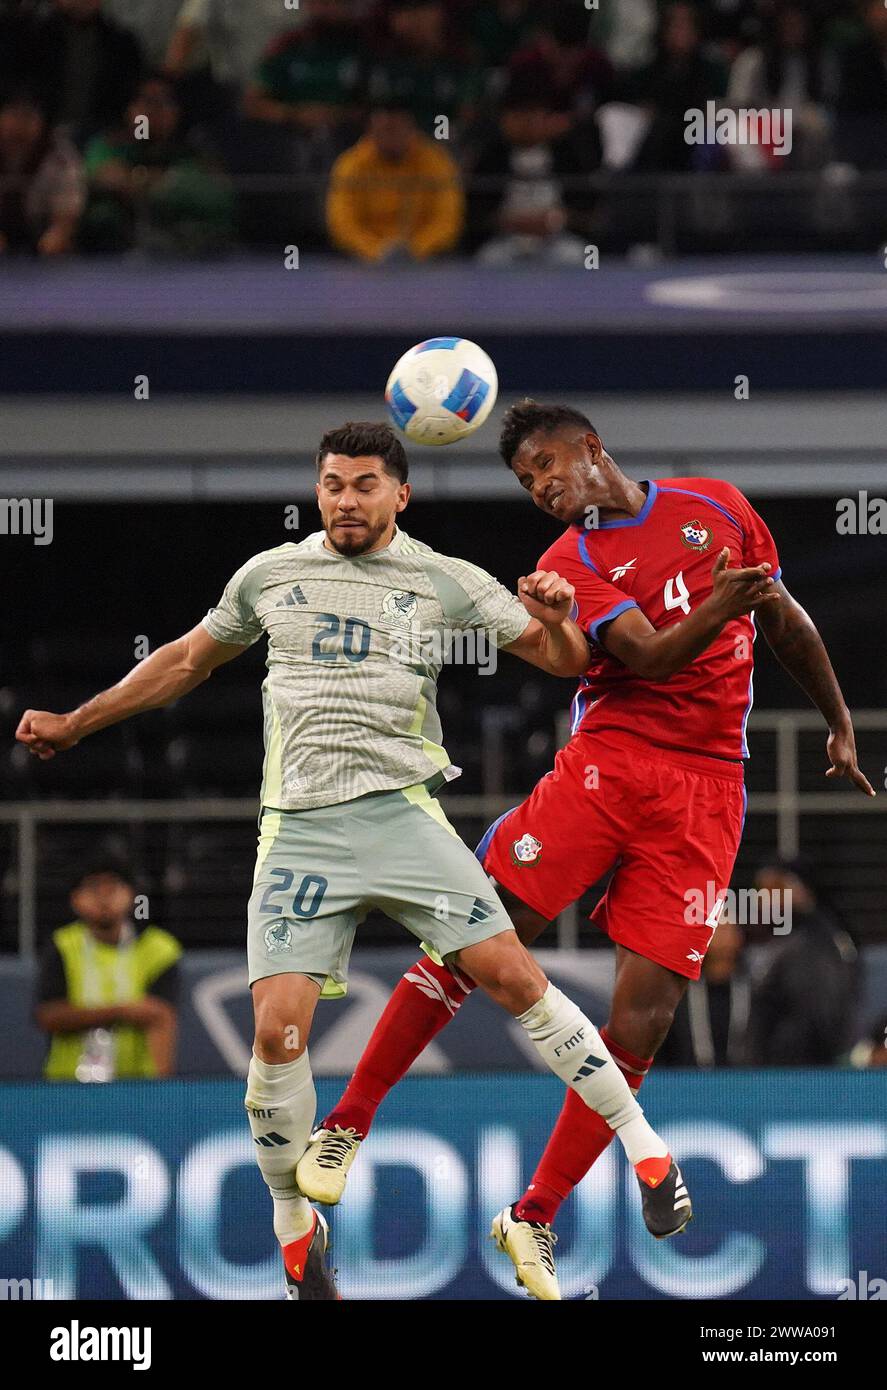 Arlington, United States. 21st Mar, 2024. March 21, 2024, Arlington, Texas: Mexico forward Henry Martin and Panama defender Fidel Escobar battle for the header during the 2024 CONCACAF Nations League Semifinals match between Mexico and Panama at AT&T Stadium. Final score Mexico 3-0 Panama. on March 21, 2024 in Arlington, Texas (Photo by Javier Vicencio/Eyepix Group/Sipa USA) Credit: Sipa USA/Alamy Live News Stock Photo